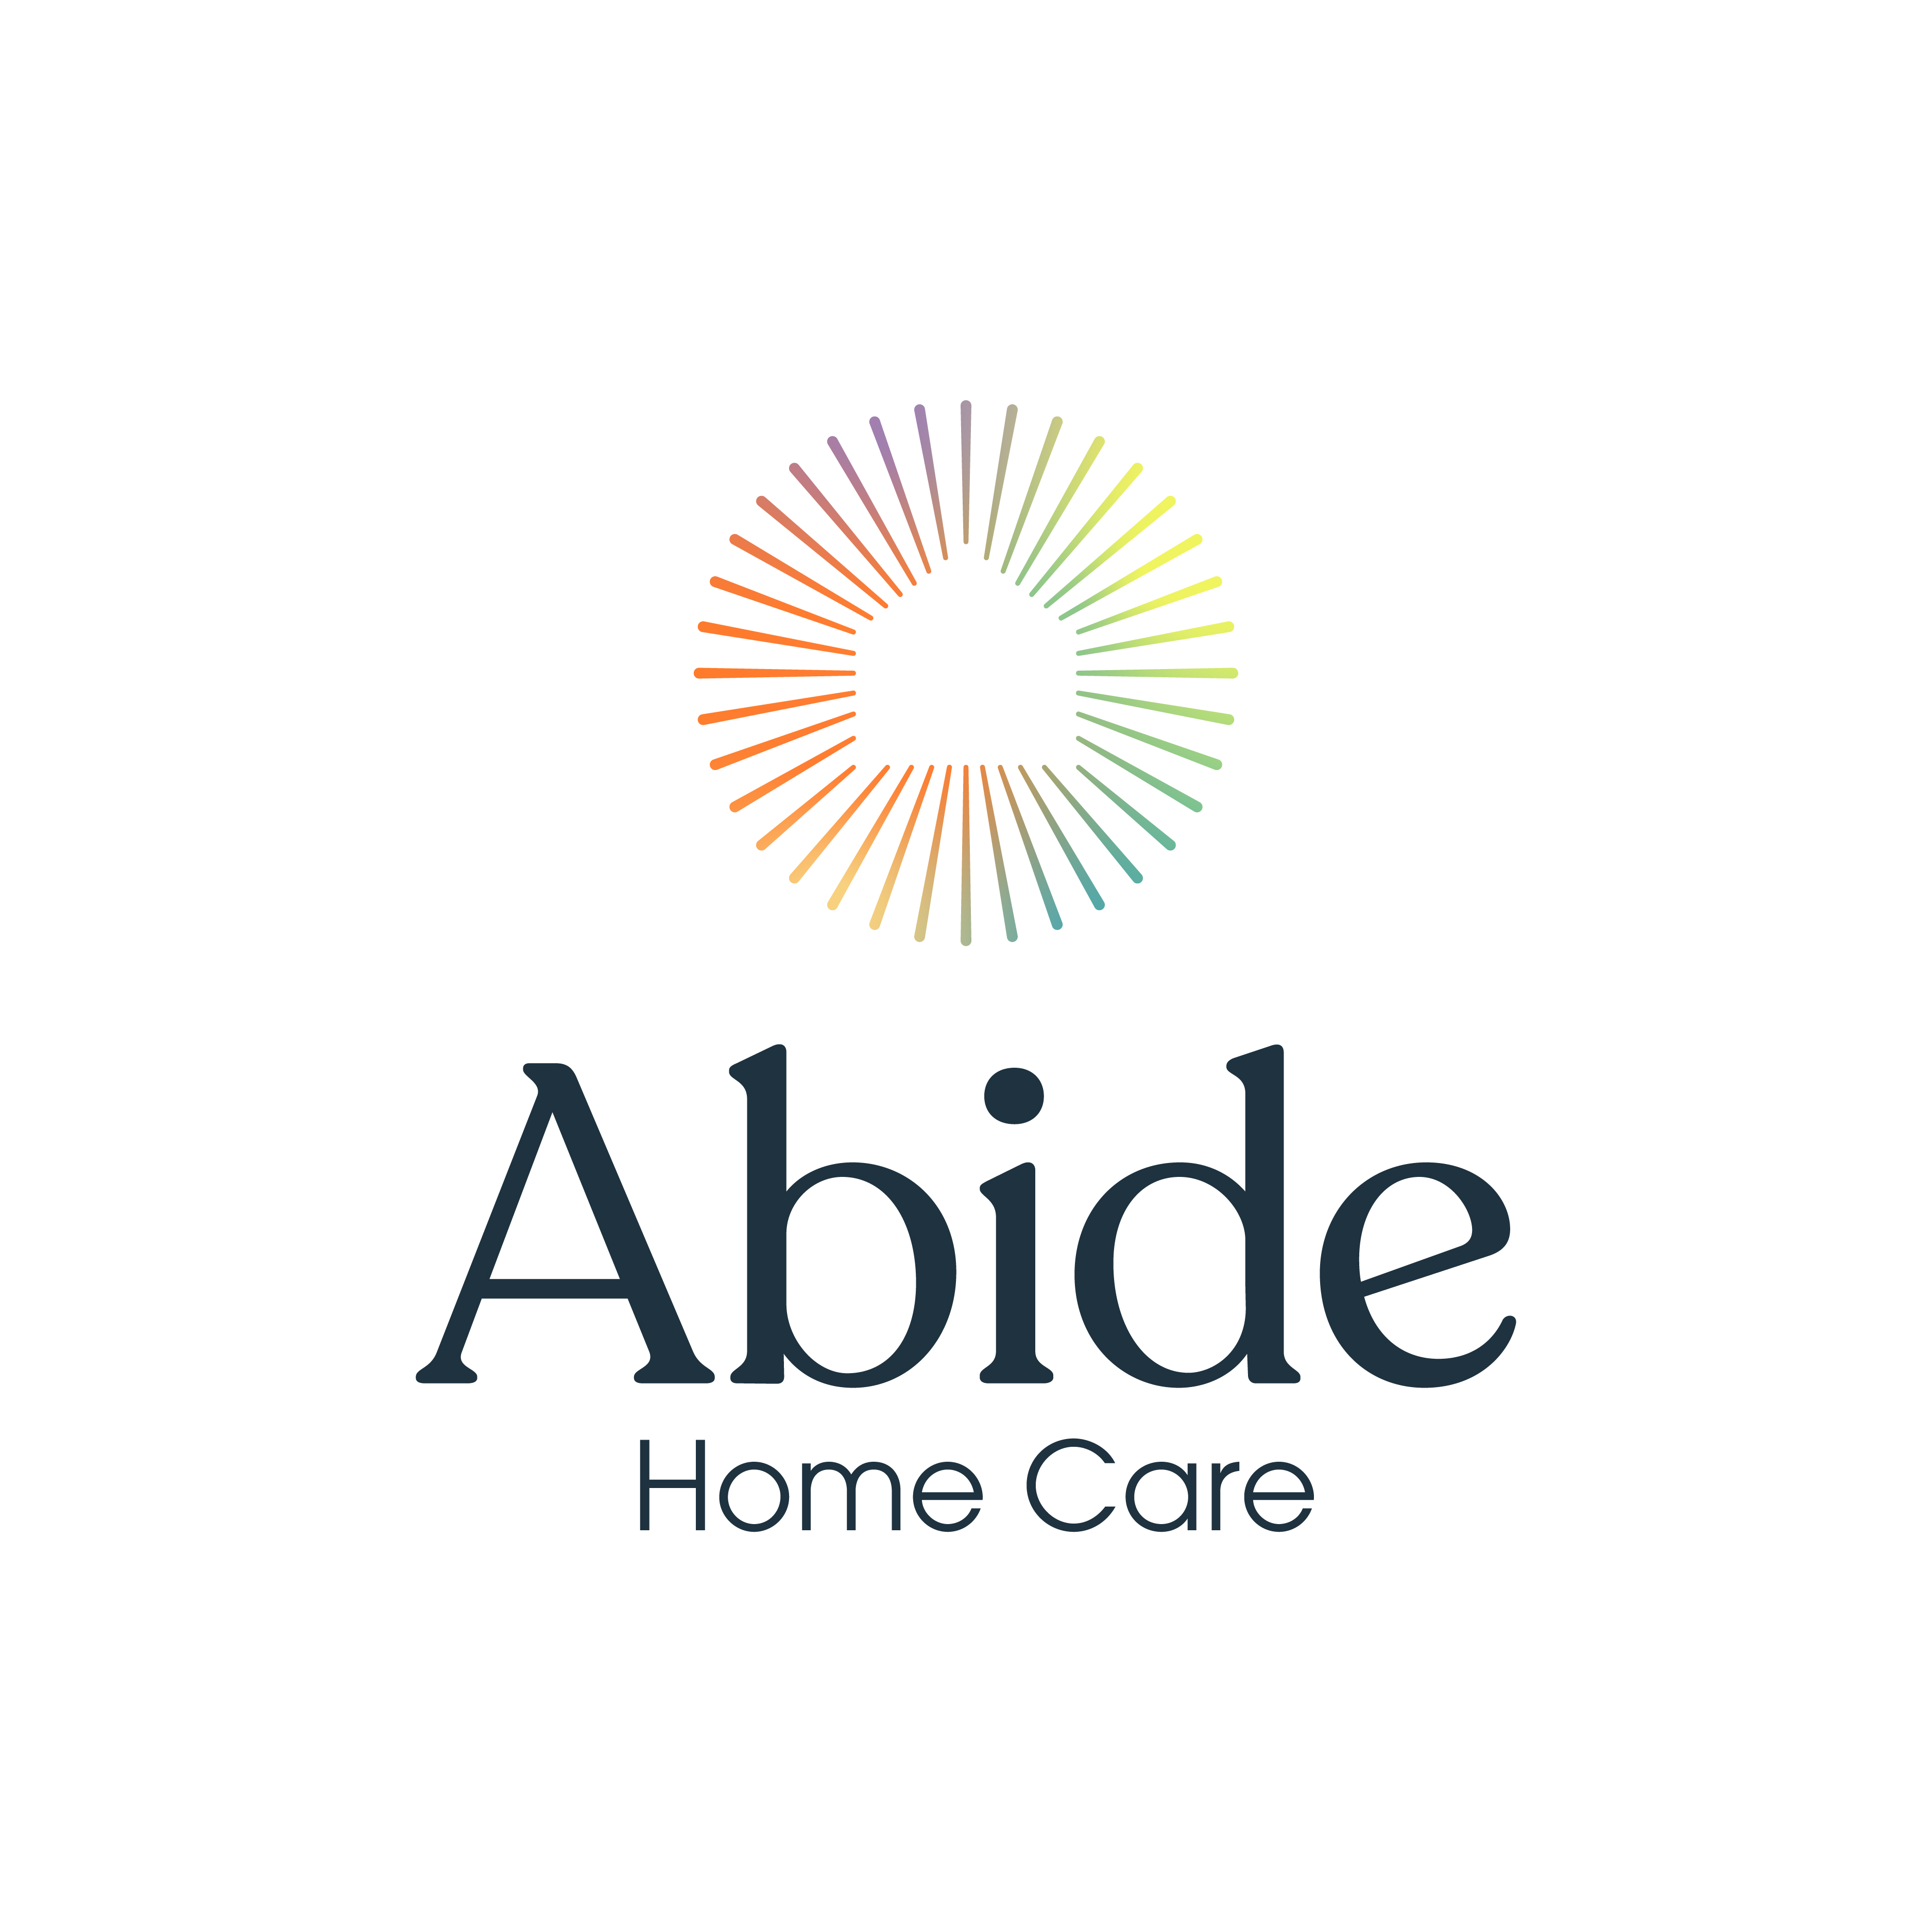 Abide Home Care - Vertical logo design by logo designer Pioneer Design for your inspiration and for the worlds largest logo competition